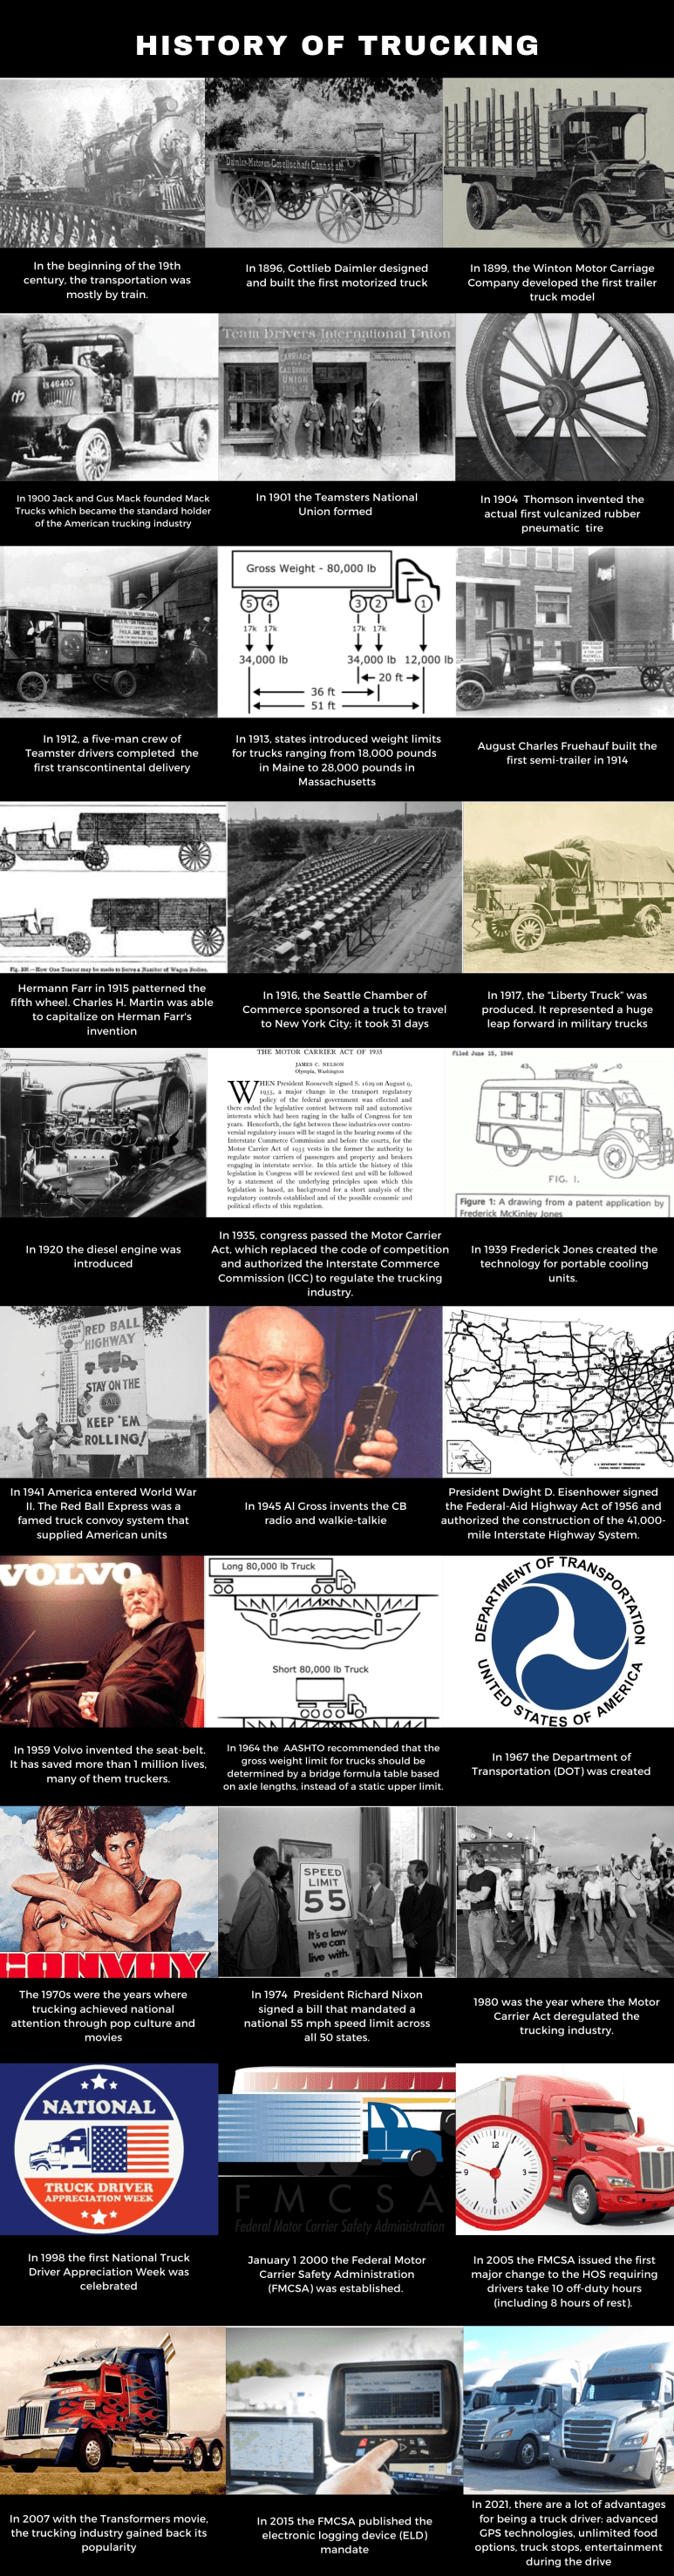 History of trucking industry infographic